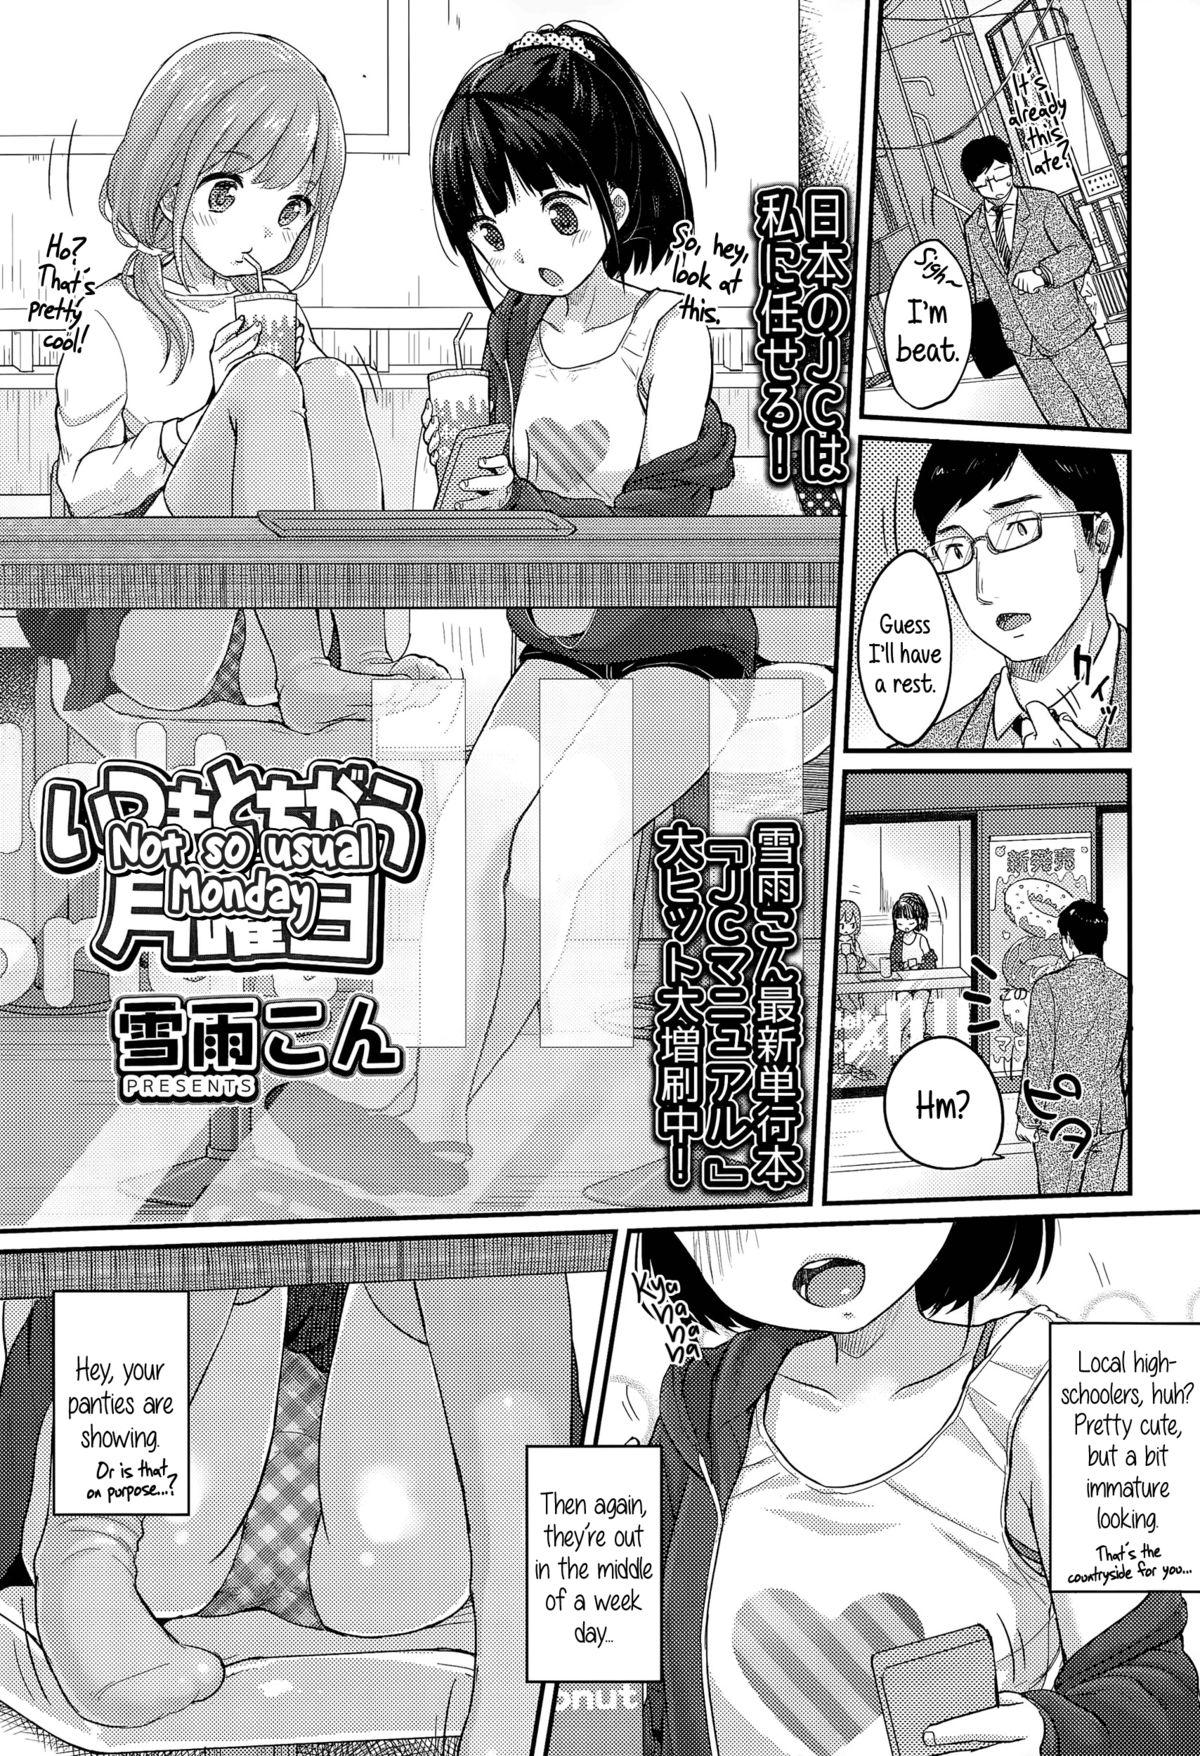 Tugging Itsumo to Chigau Getsuyoubi | Not so usual Monday Milfsex - Page 1